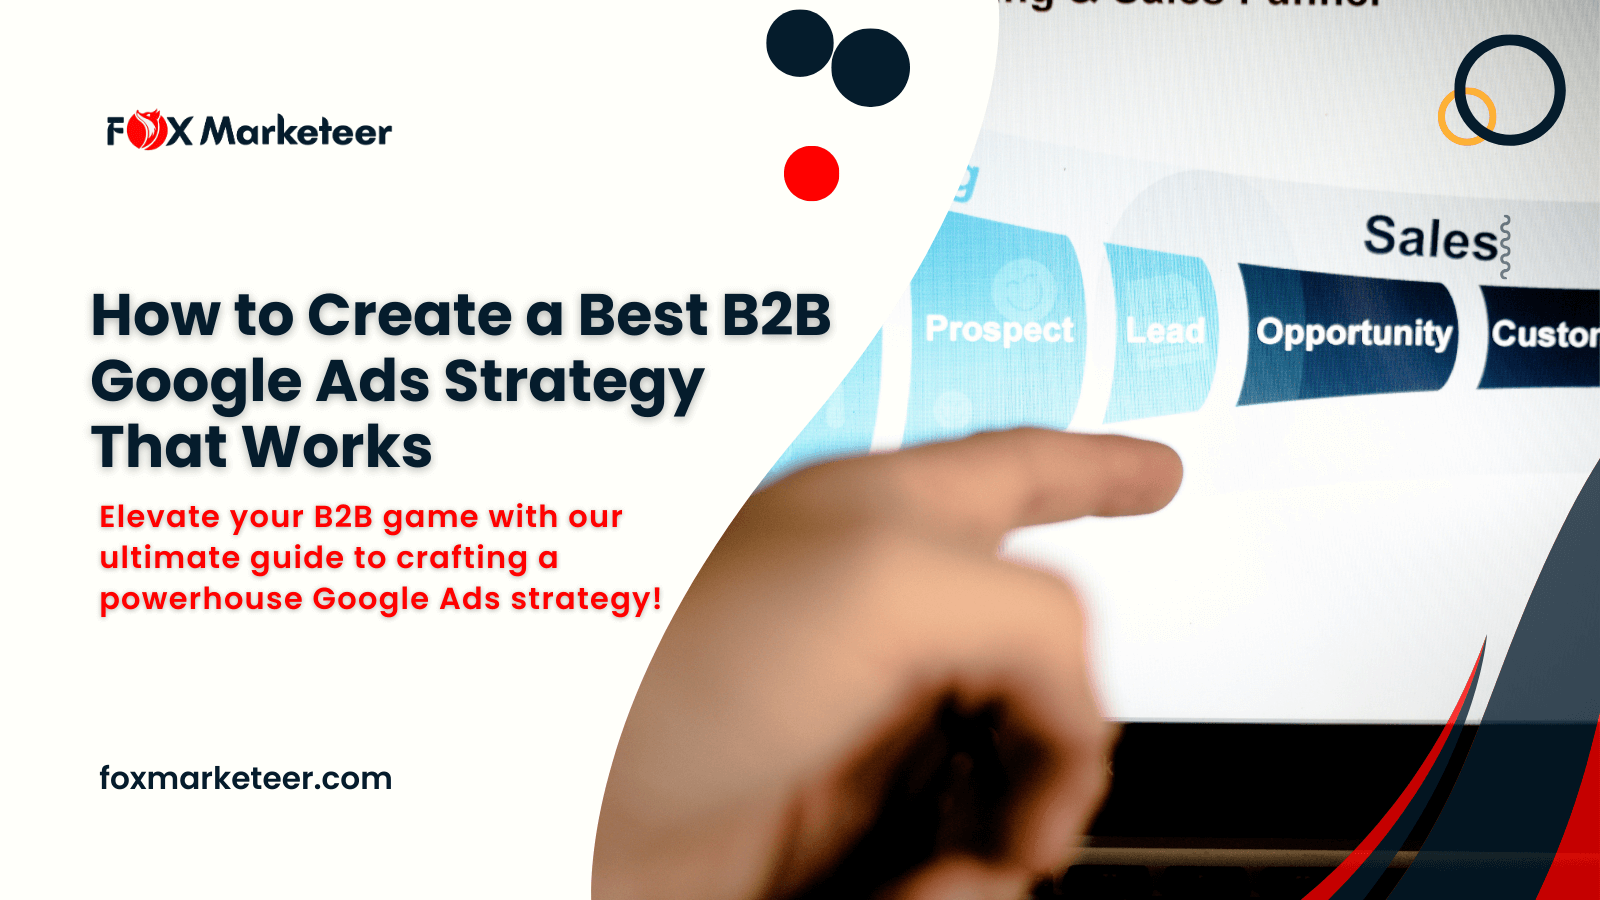 How to Create a Best B2B Google Ads Strategy That Works